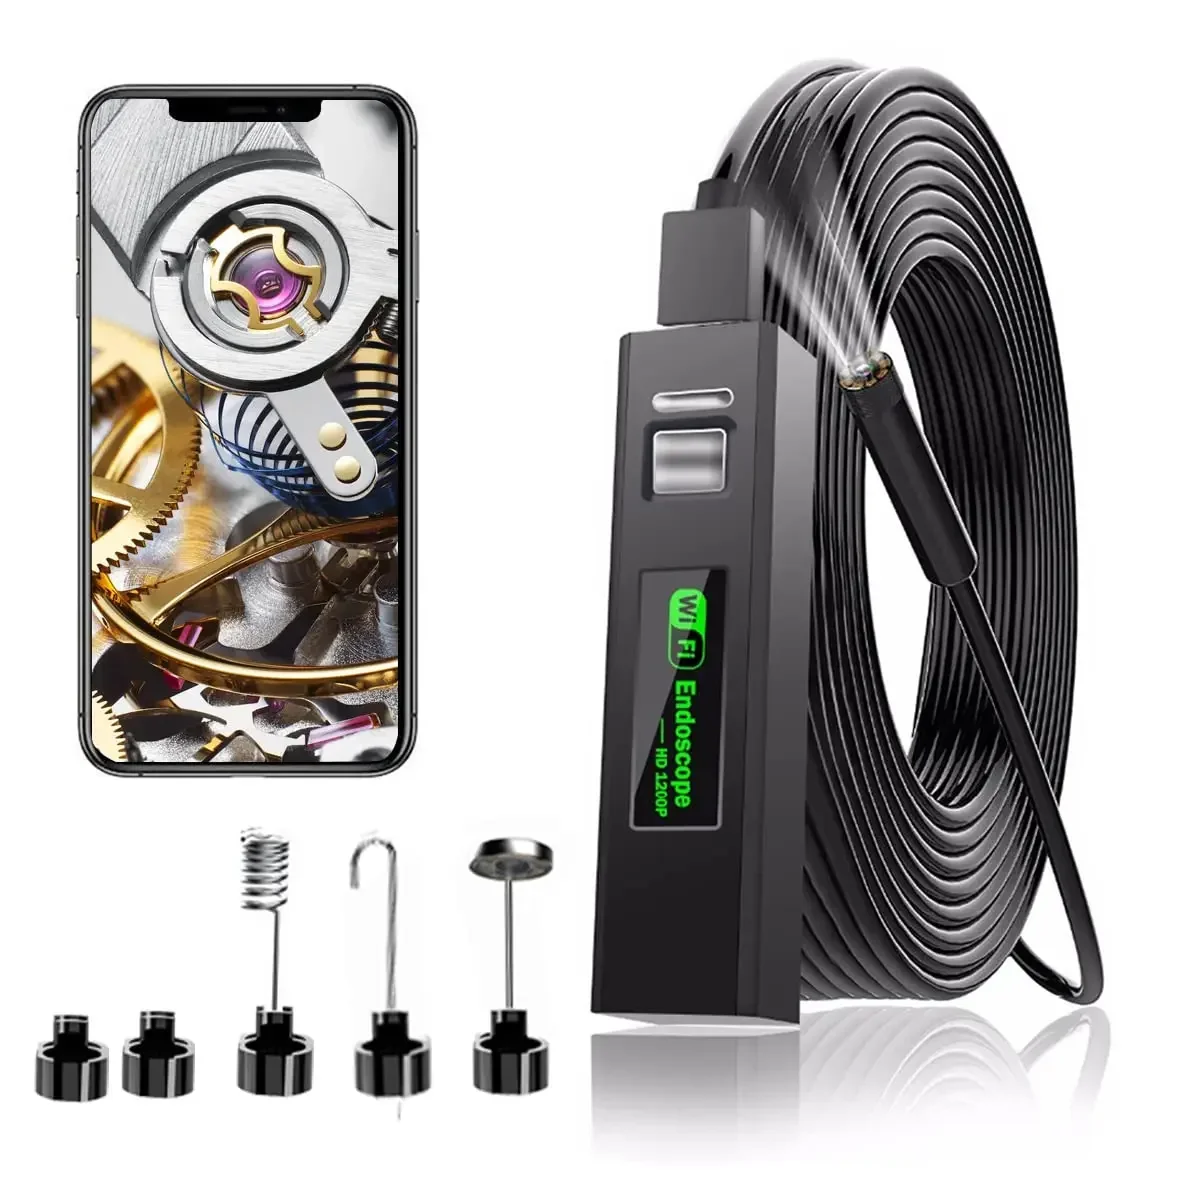 

Wireless Endoscope WiFi Borescope Inspection Camera 1200P HD IP68 Waterproof Snake Camera with 8 LED For Android IOS Tablet PC